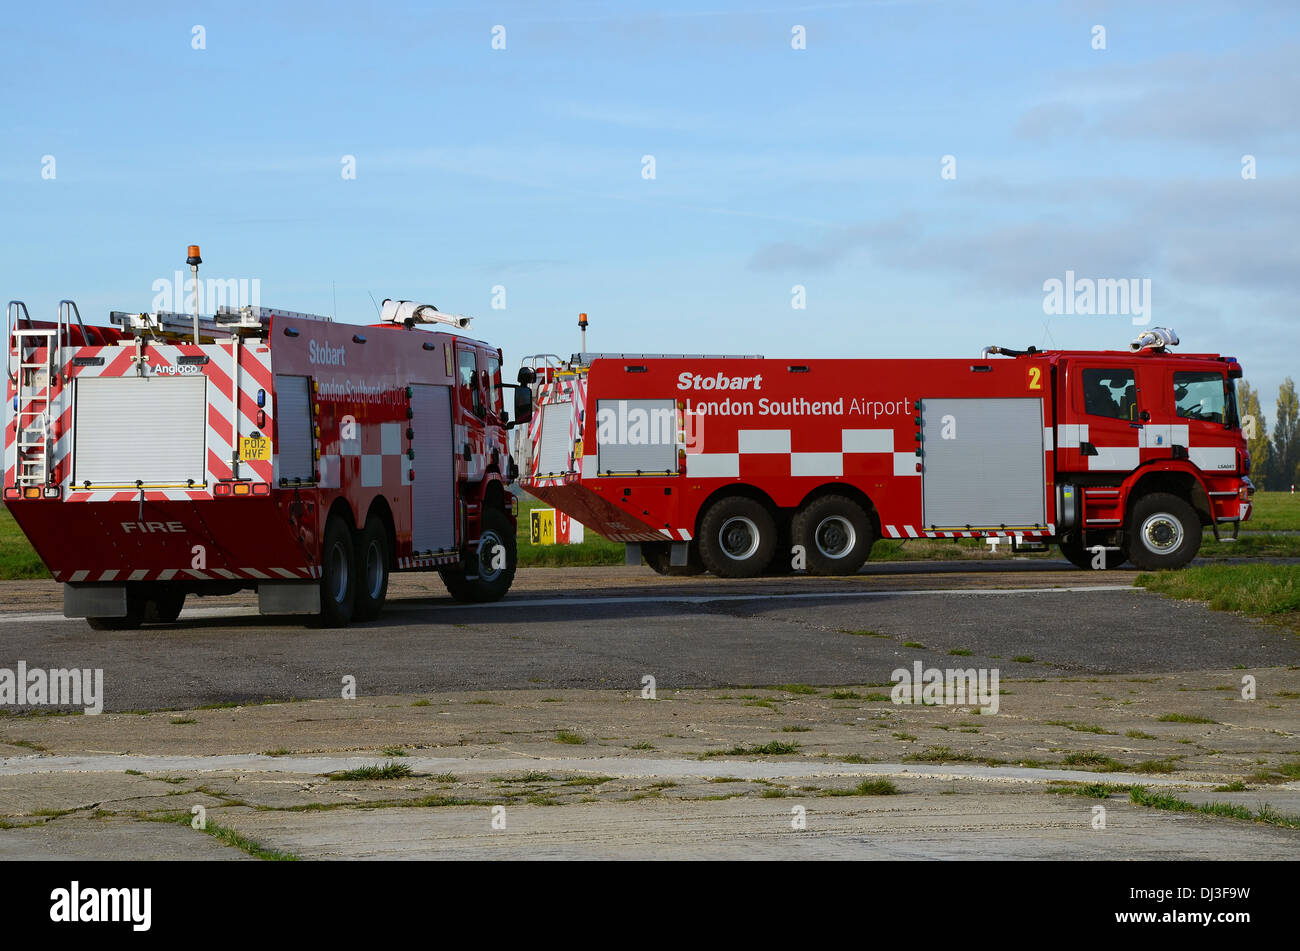 Two airport fire engines drive out to the airport taxiway leading to the runway on a practice run. London Southend Airport emergency vehicles Stock Photo